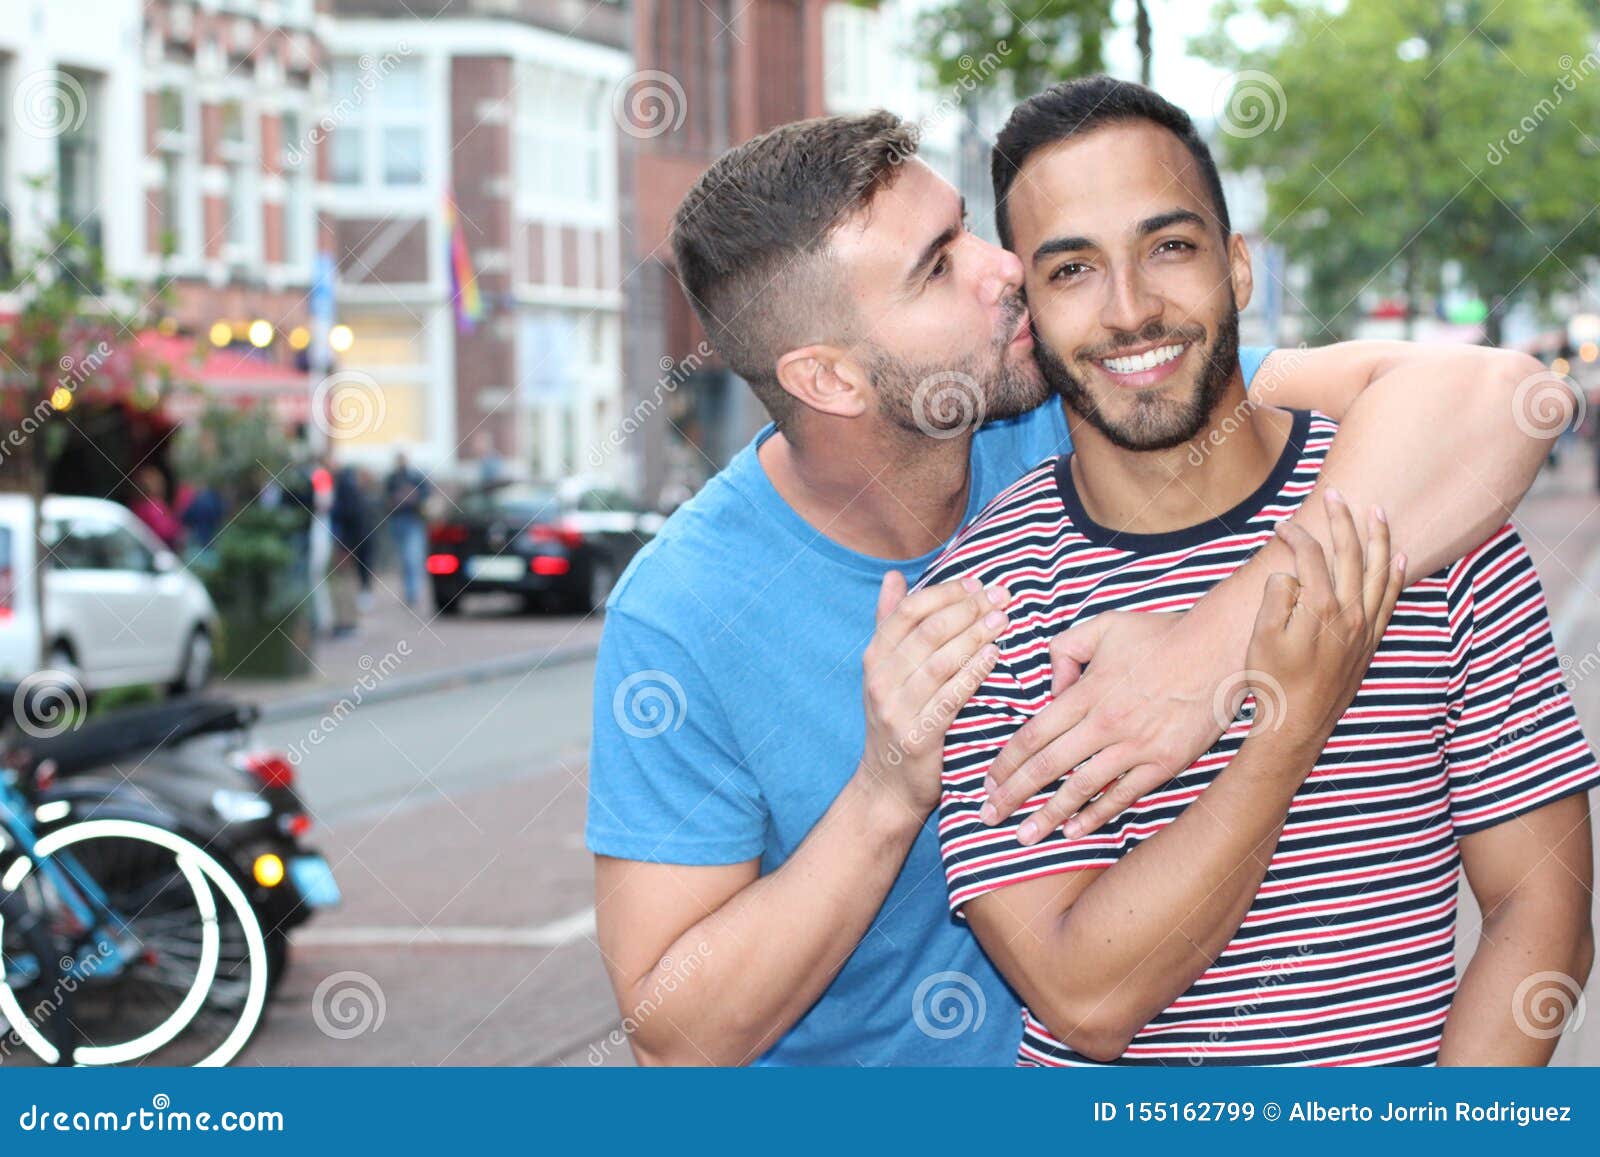 Homosexual dating